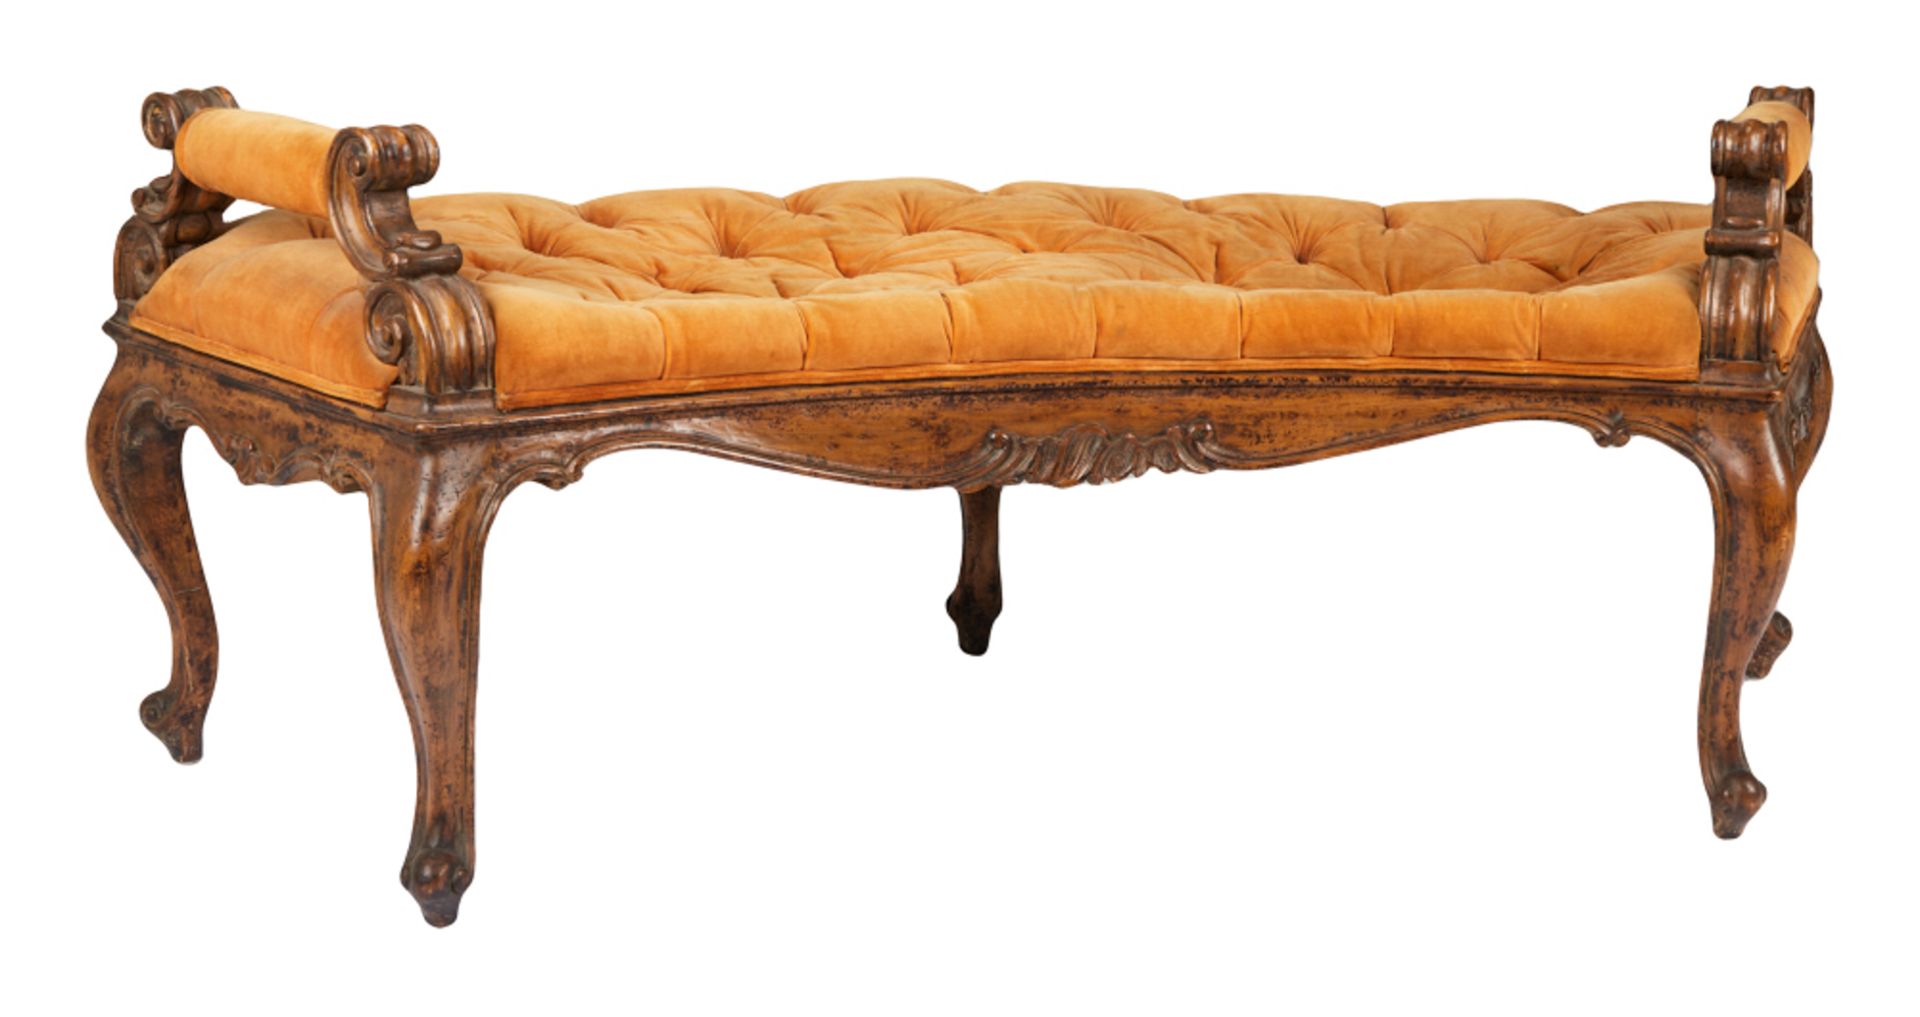 ROBERT EVANS | UPHOLSTERED CURVED BENCH - Image 3 of 18